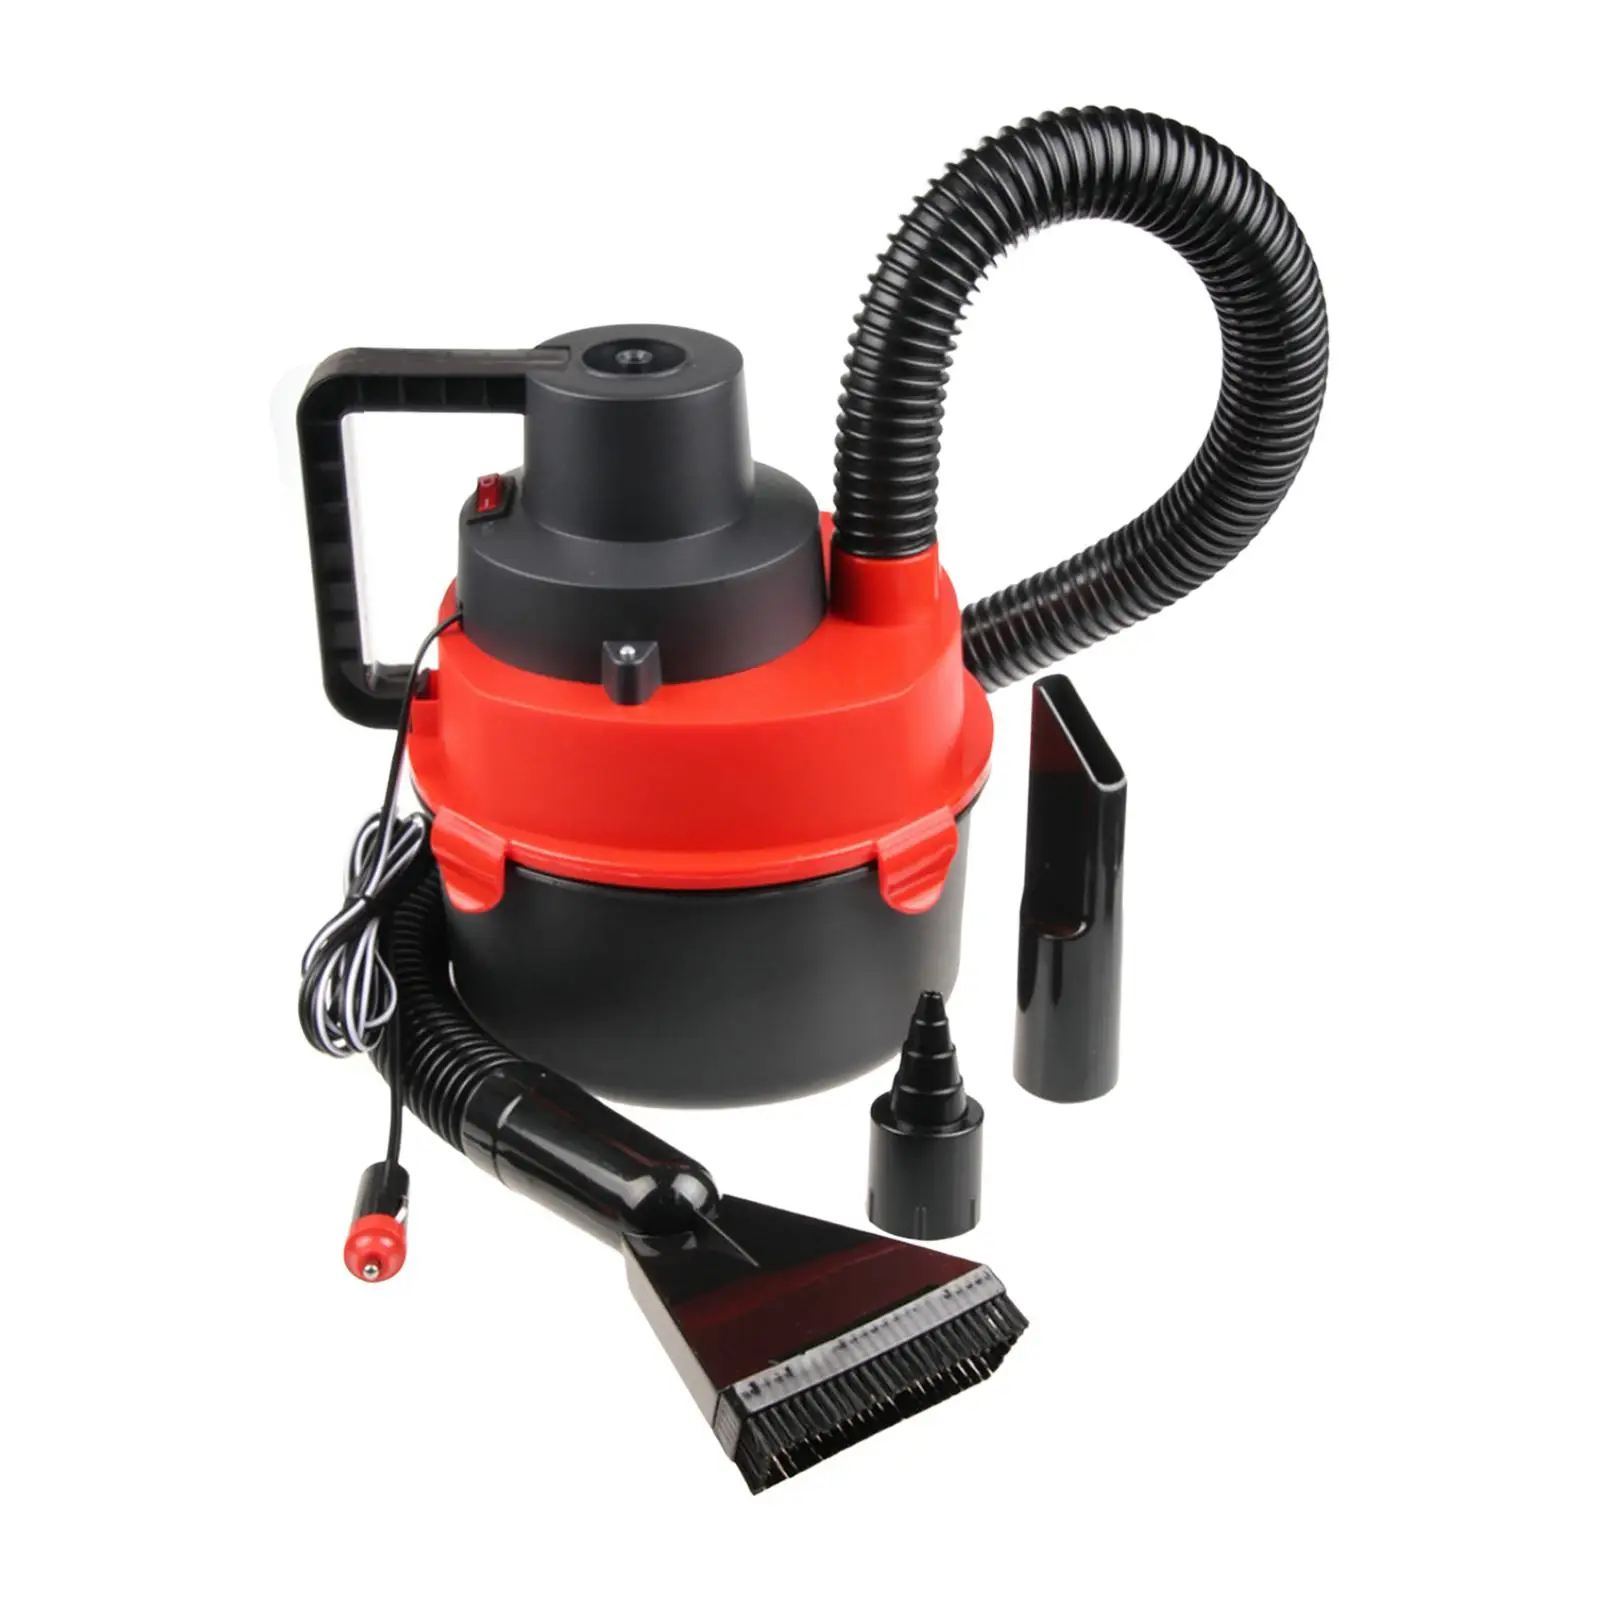 12V Wet/Dry Car Canister Vacuum Wet or Dry Pickup for Spills and Mud Compact